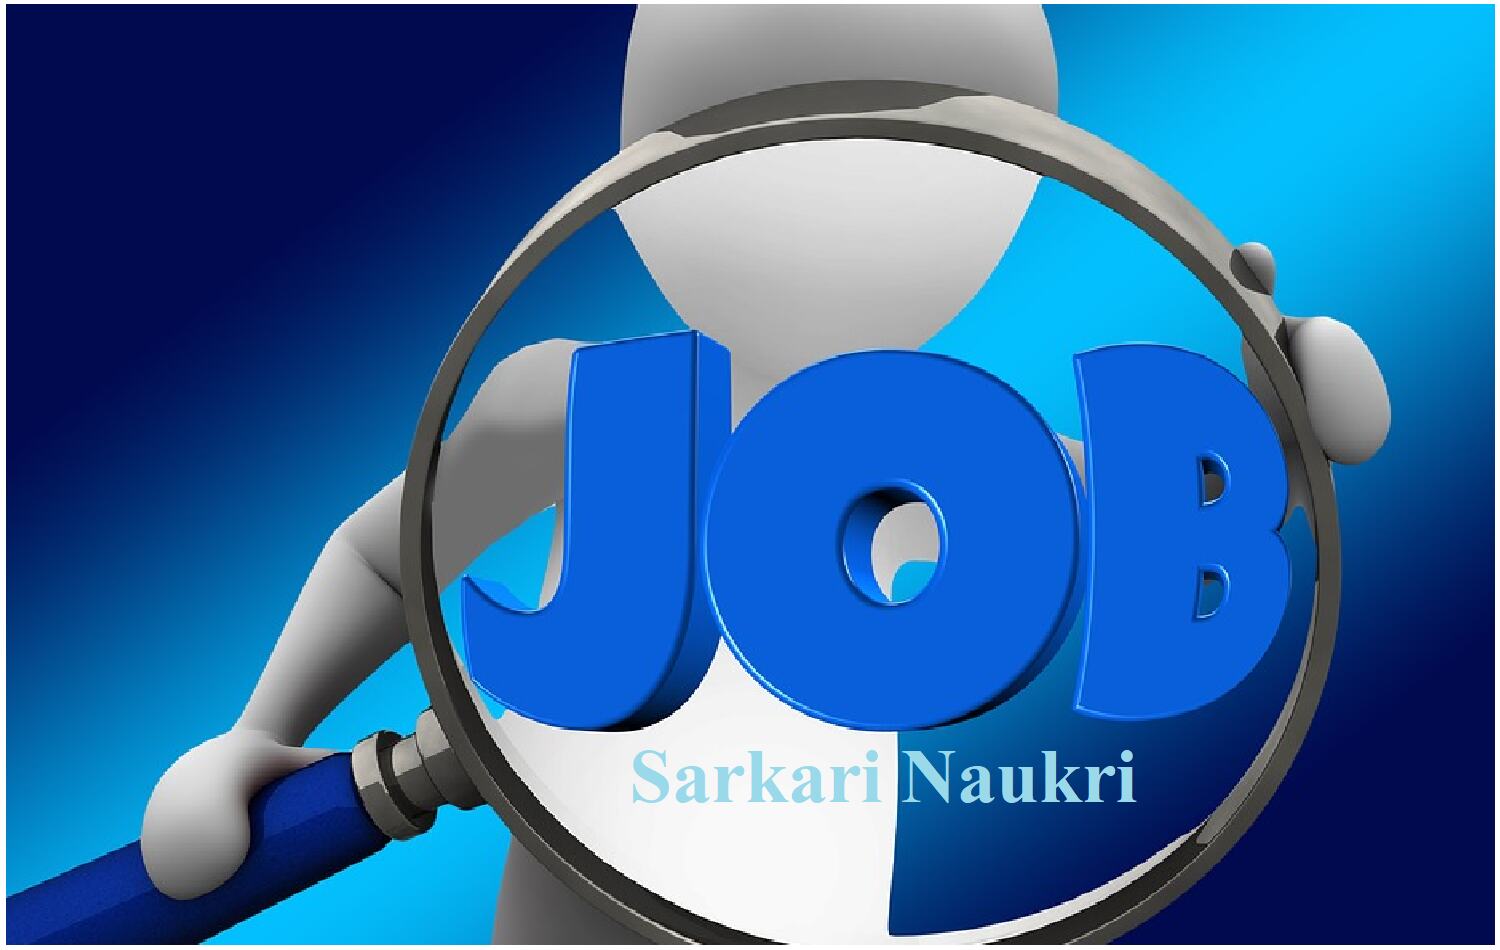 Sarkari Naukri: Jobs left in the Ministry of Defense, this degree should be just